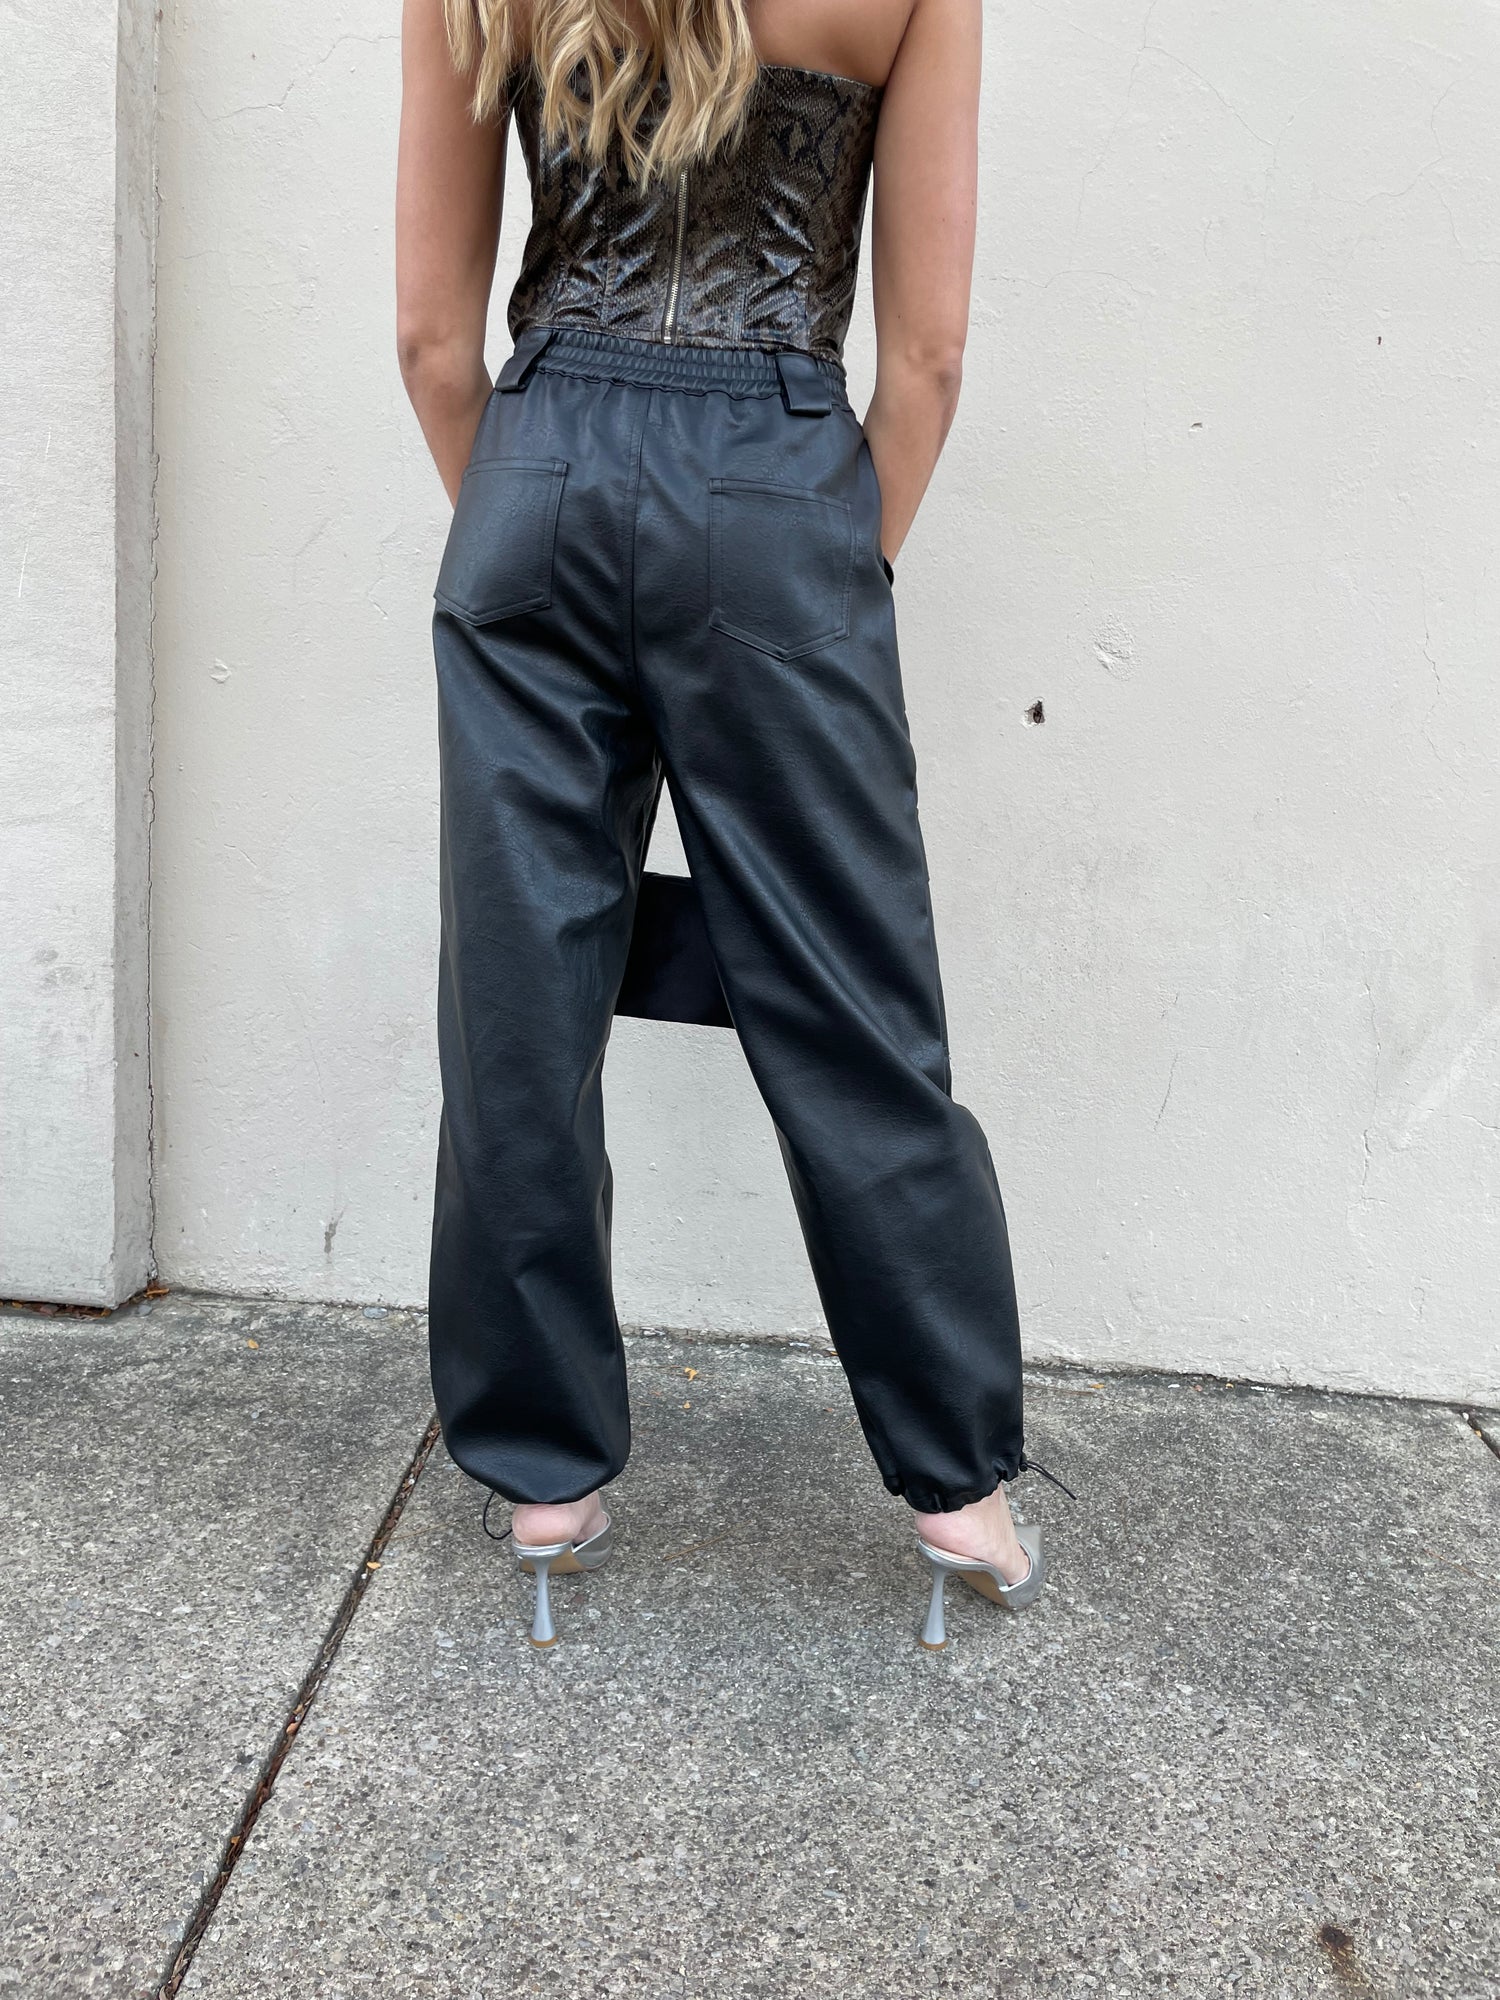 PRETTY GARBAGE BLACK LEATHER CARGO JOGGERS - THE HIP EAGLE BOUTIQUE